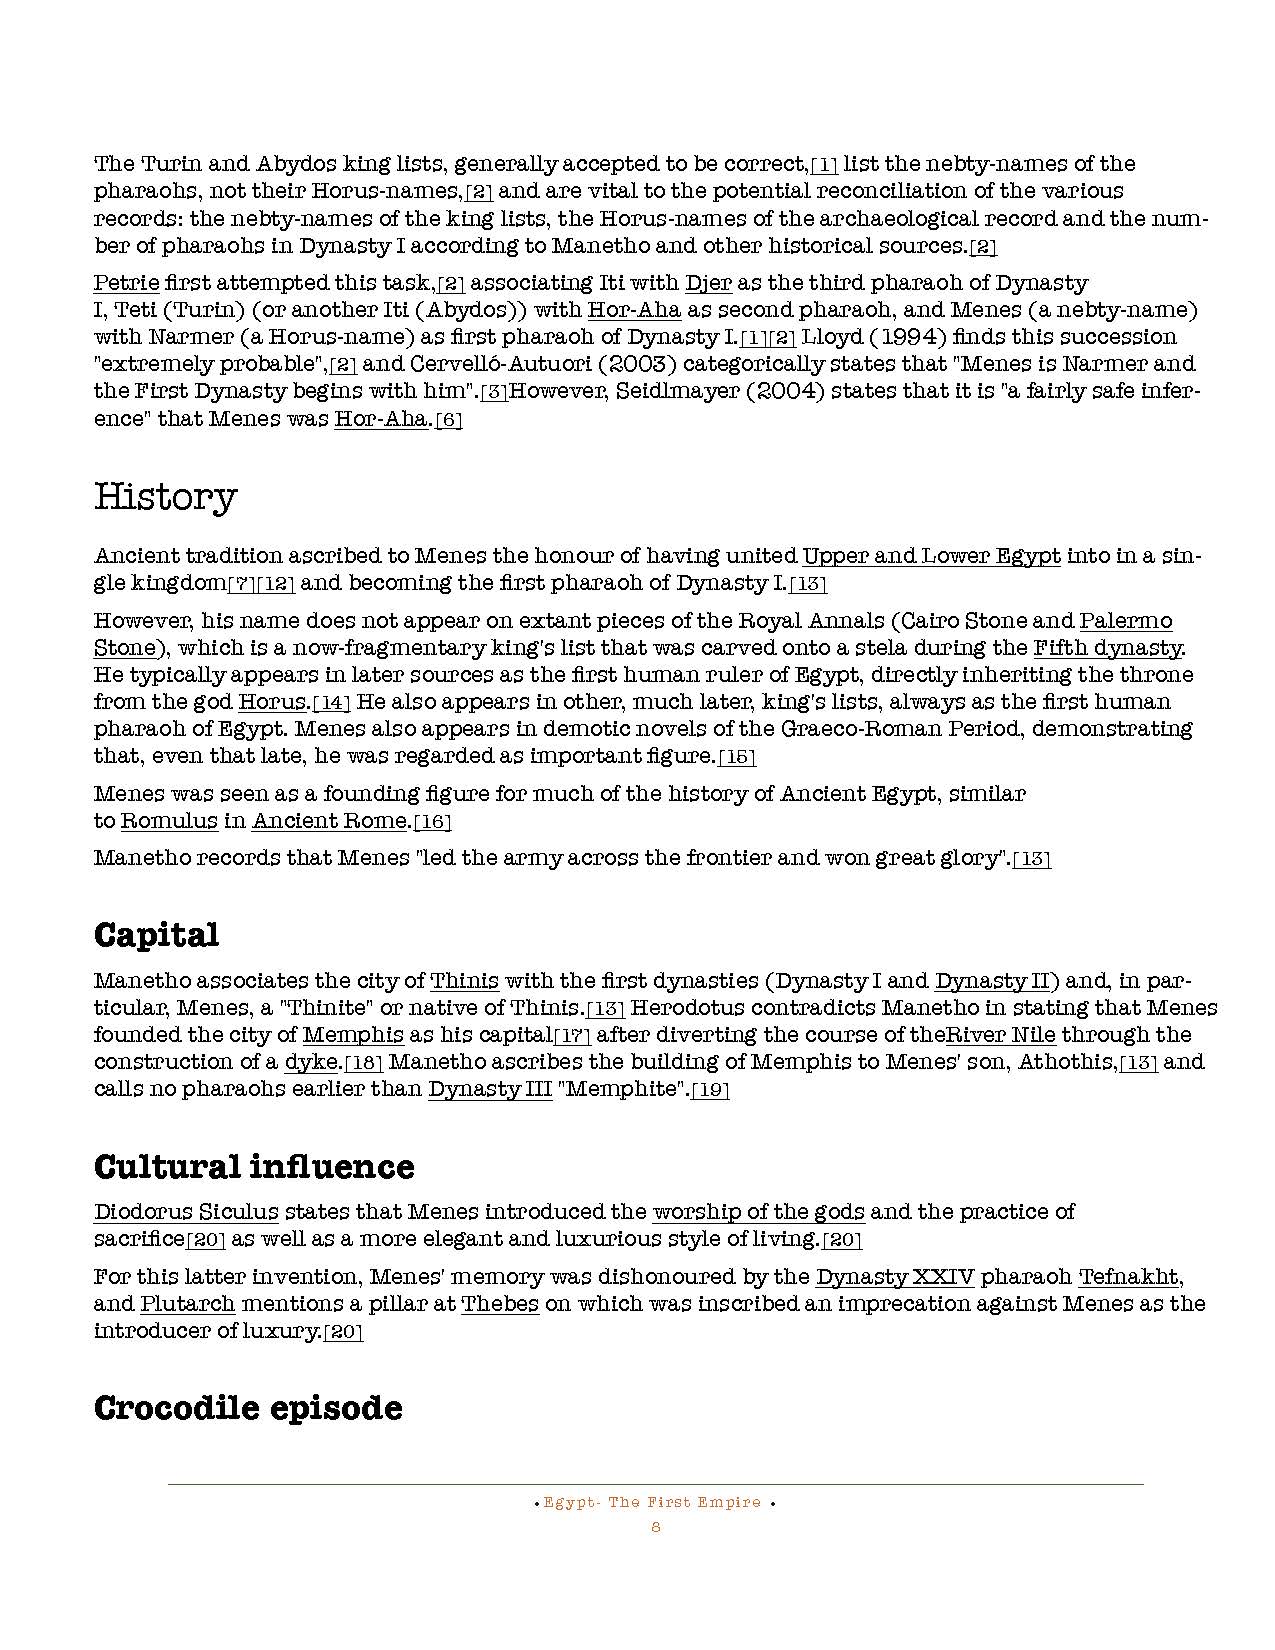 HOCE- Egypt  (First Empire) Notes_Page_008.jpg